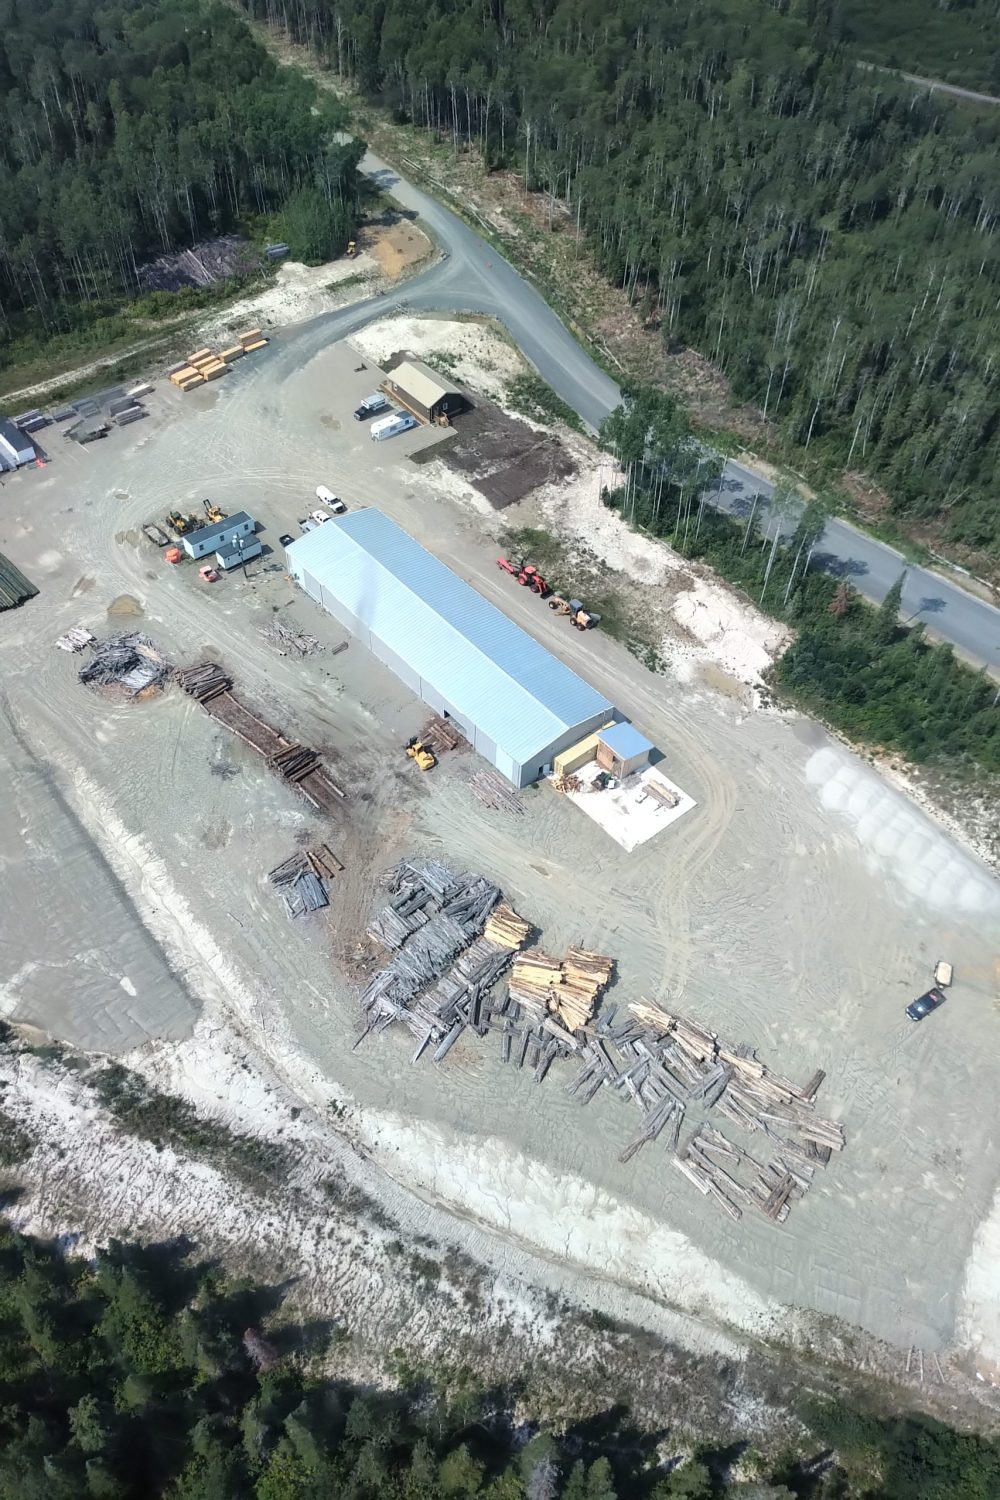 Pic of Sawmill from Helicopter